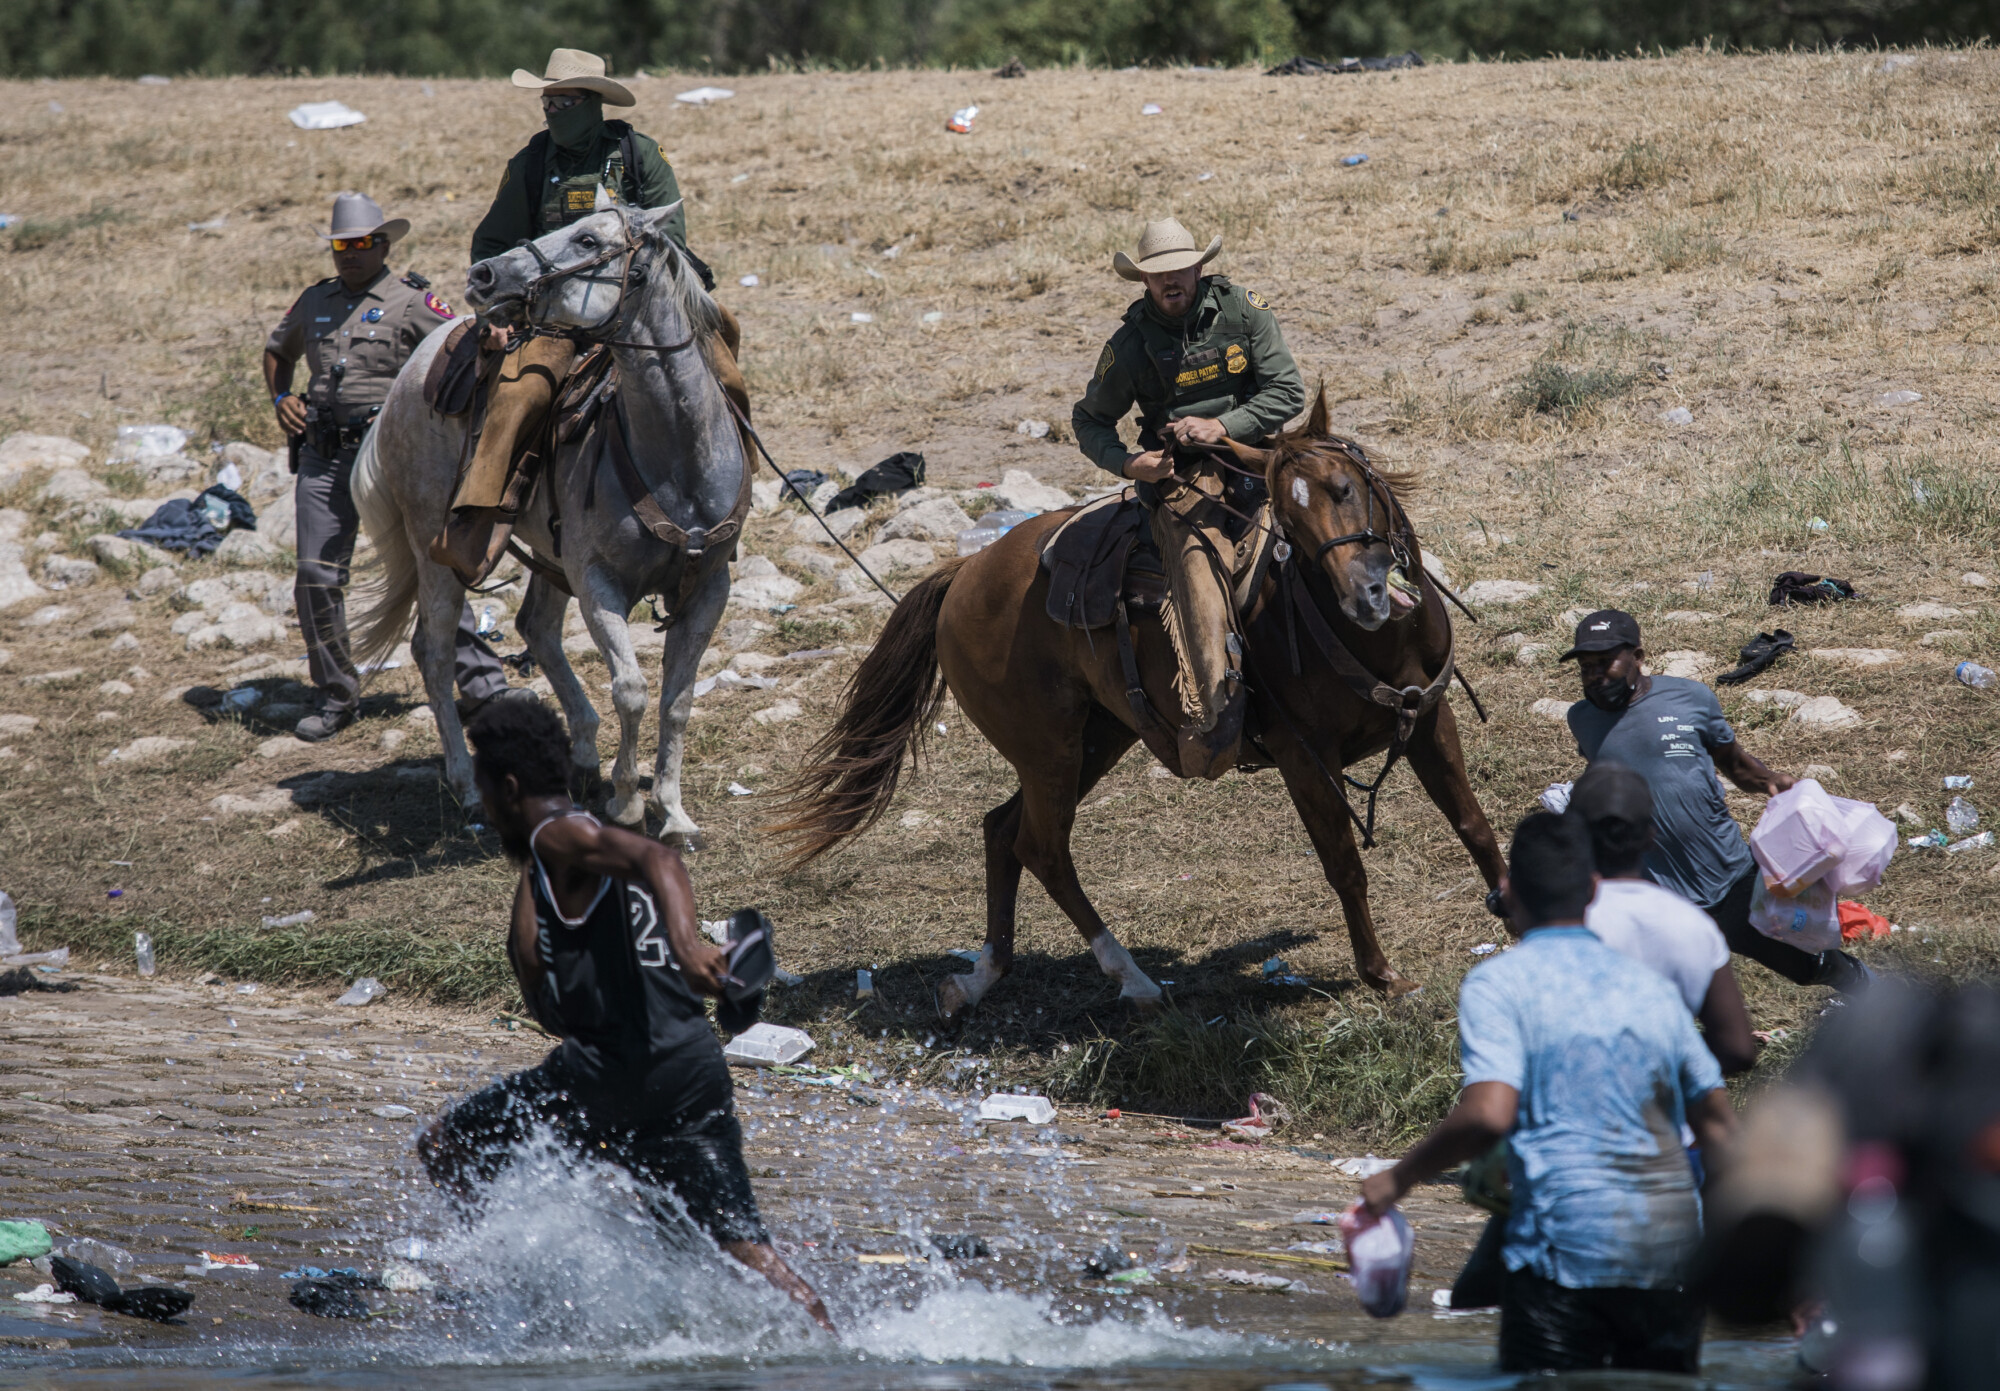 Mayorkas Vows to Make Public Results of Probe Into Border Patrol Agents on Horseback Confronting Illegal Immigrants